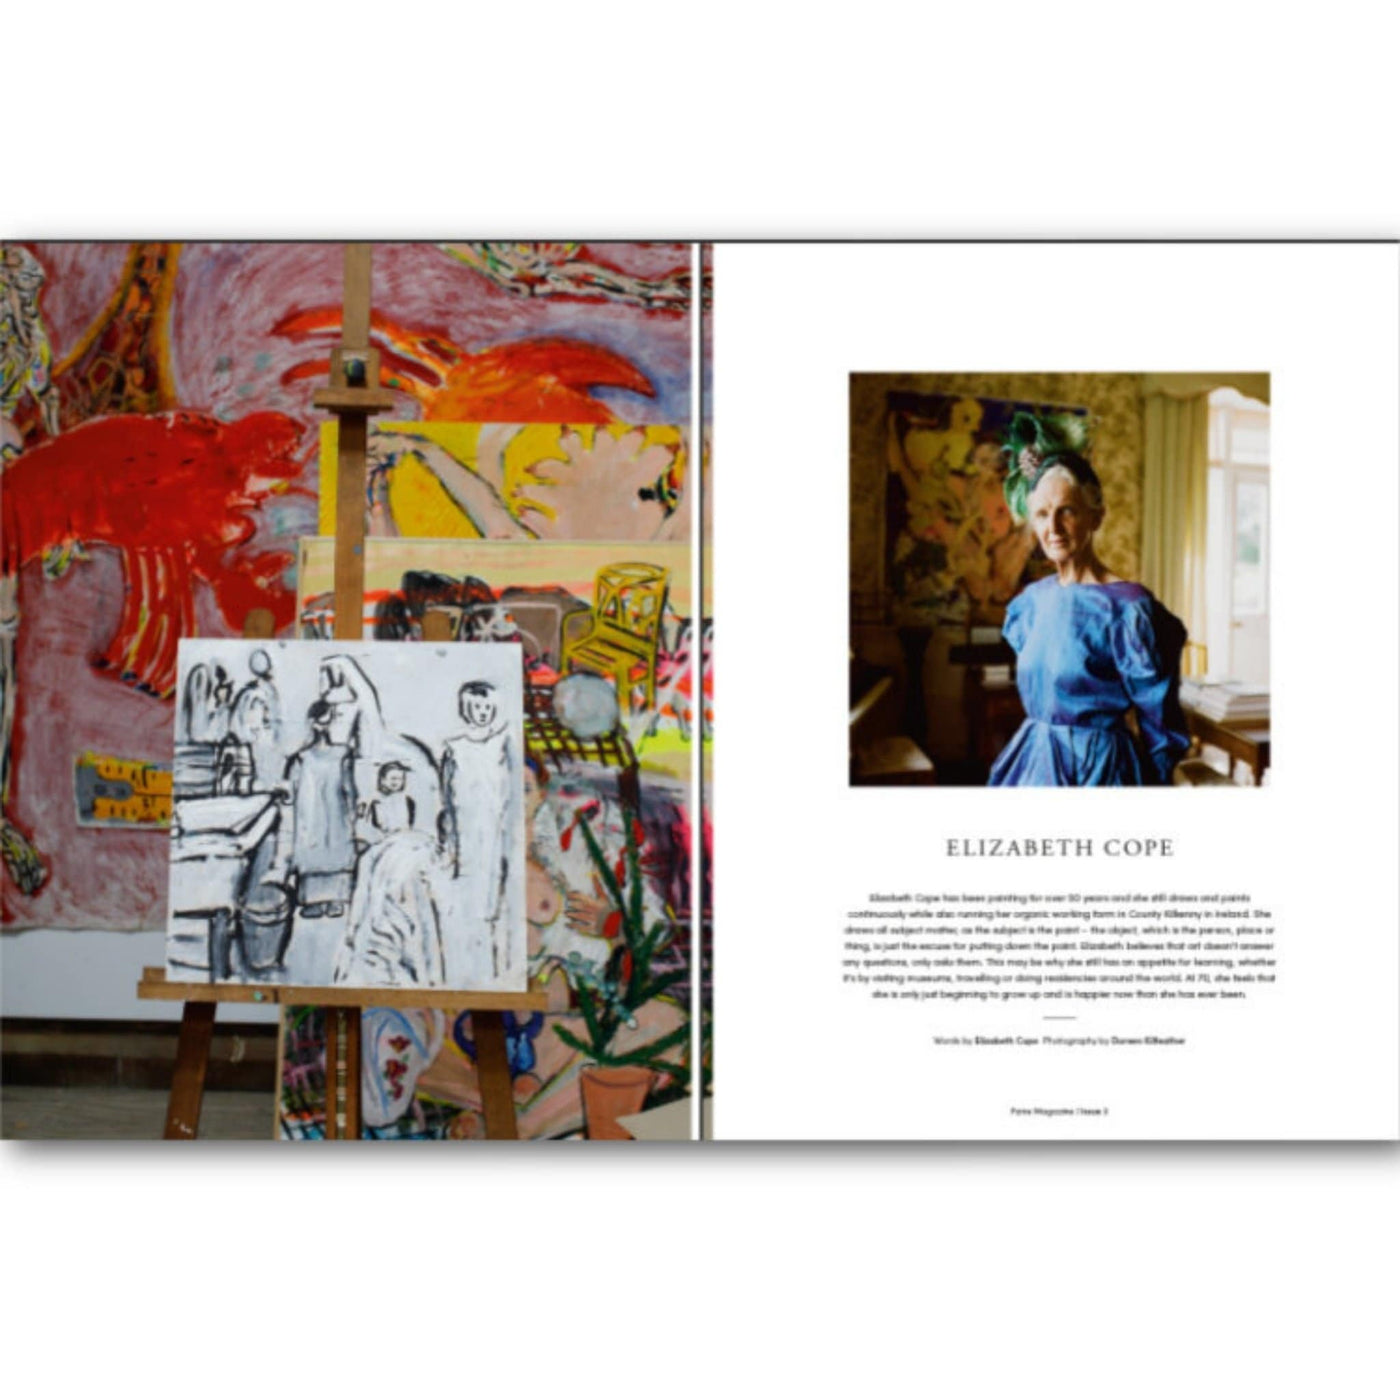 The Woolly Thistle Faire Magazine Issue 3, Elizabeth Cope and featuring several paintings